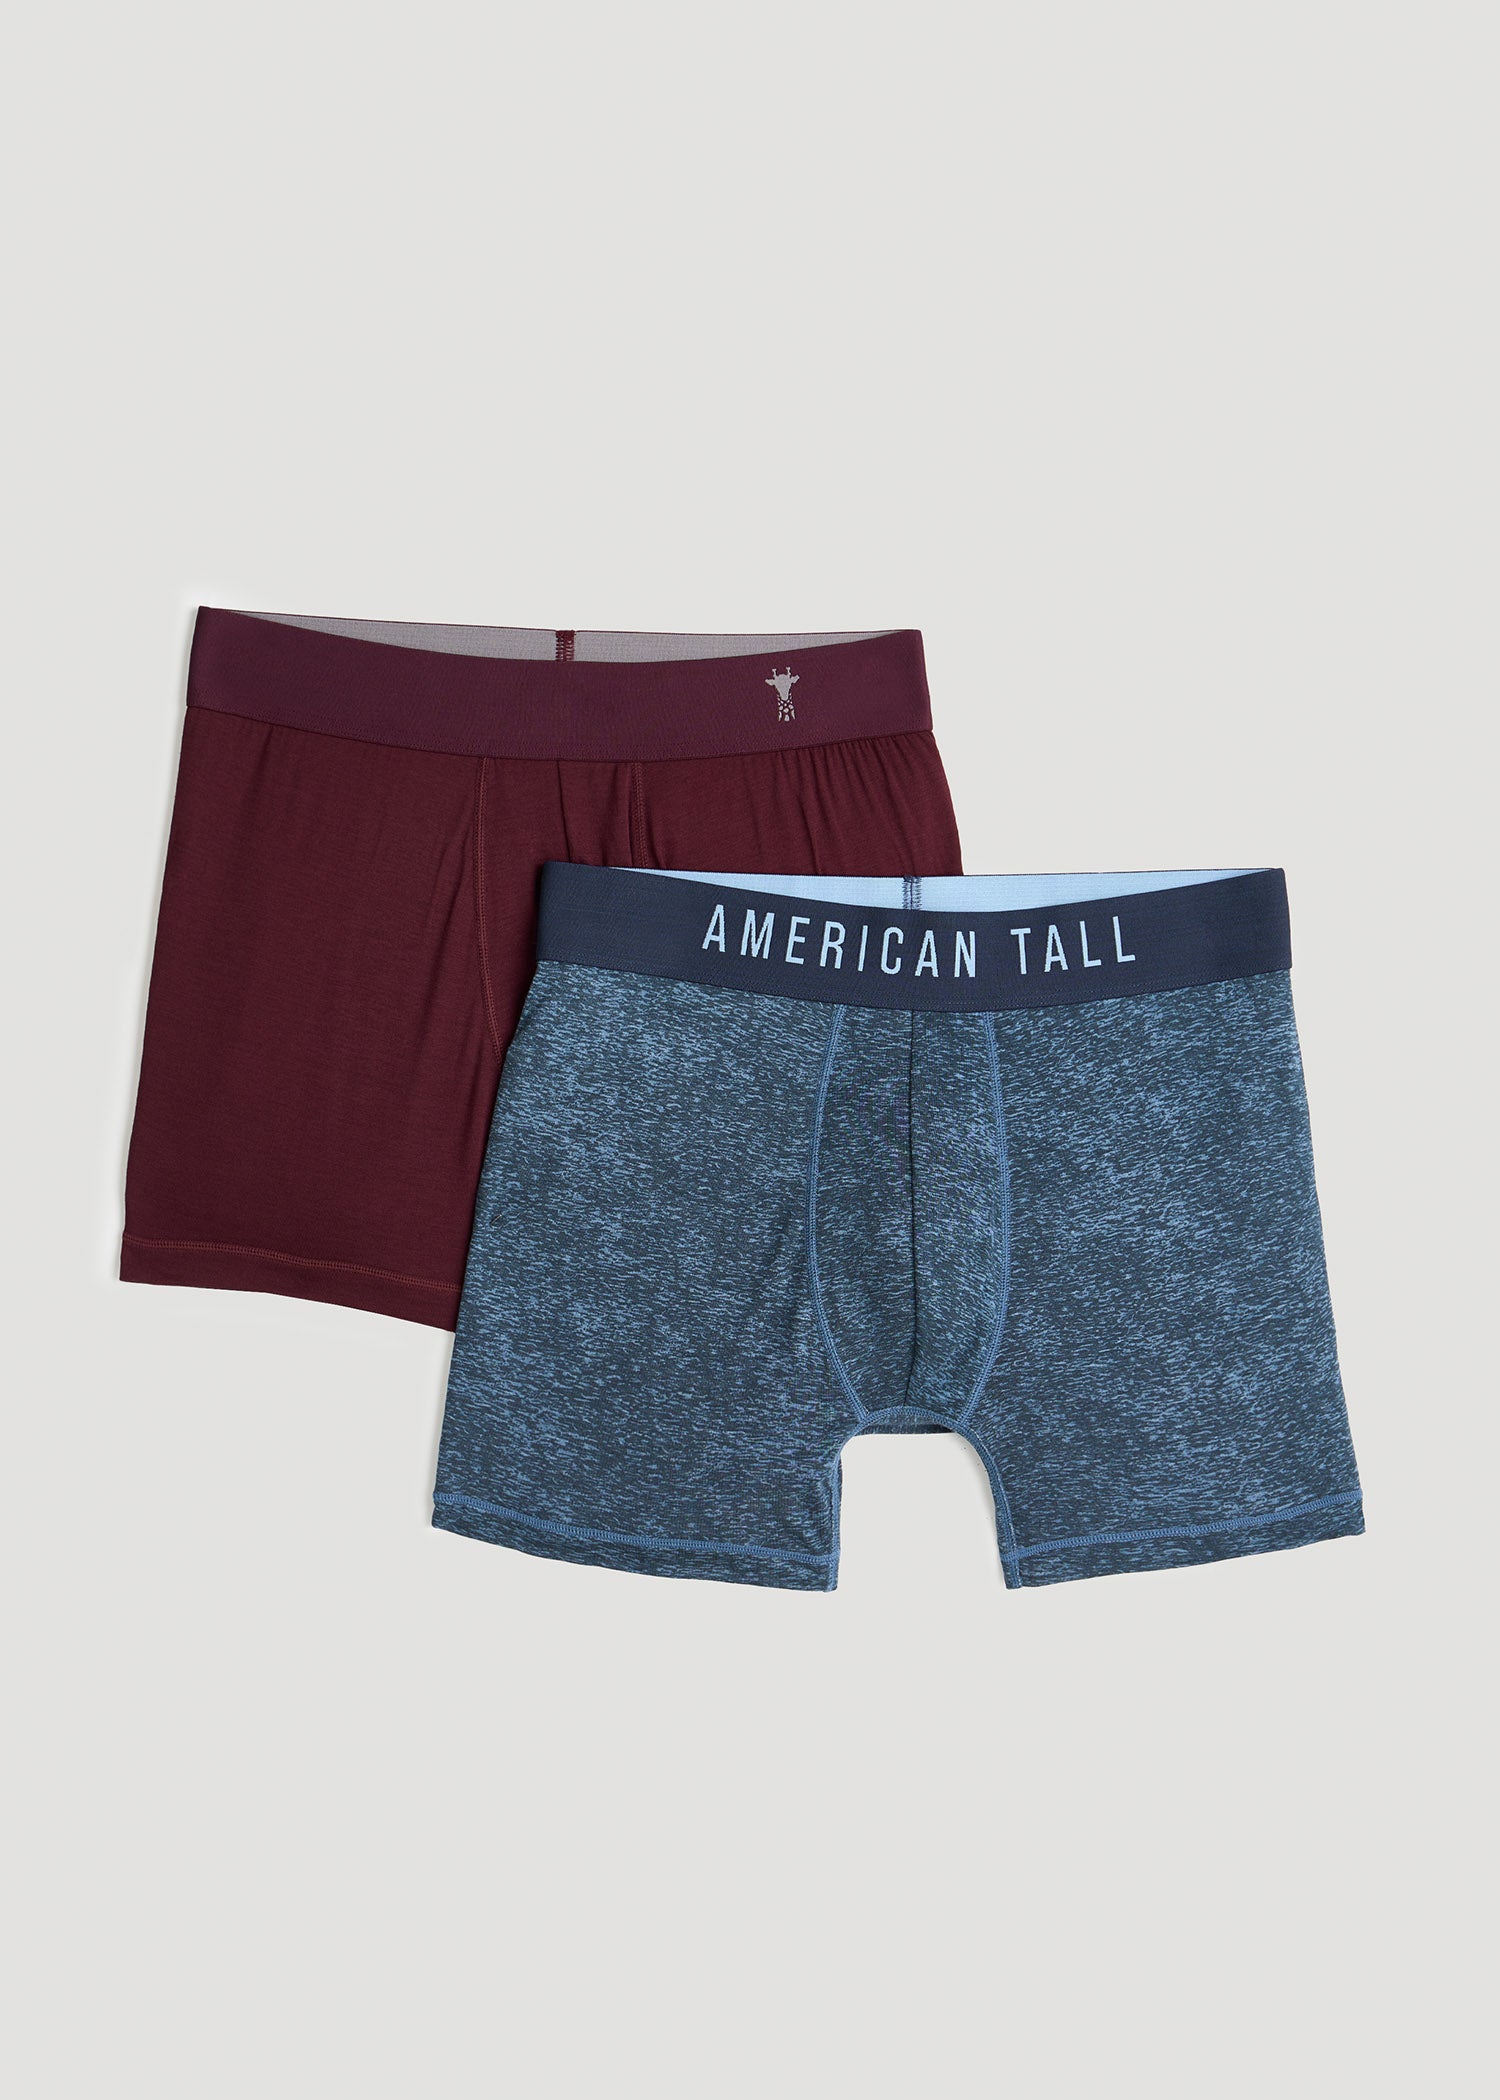 Micro Modal Extra-Long Boxer Briefs in Lake Print & Aubergine (2-Pack)